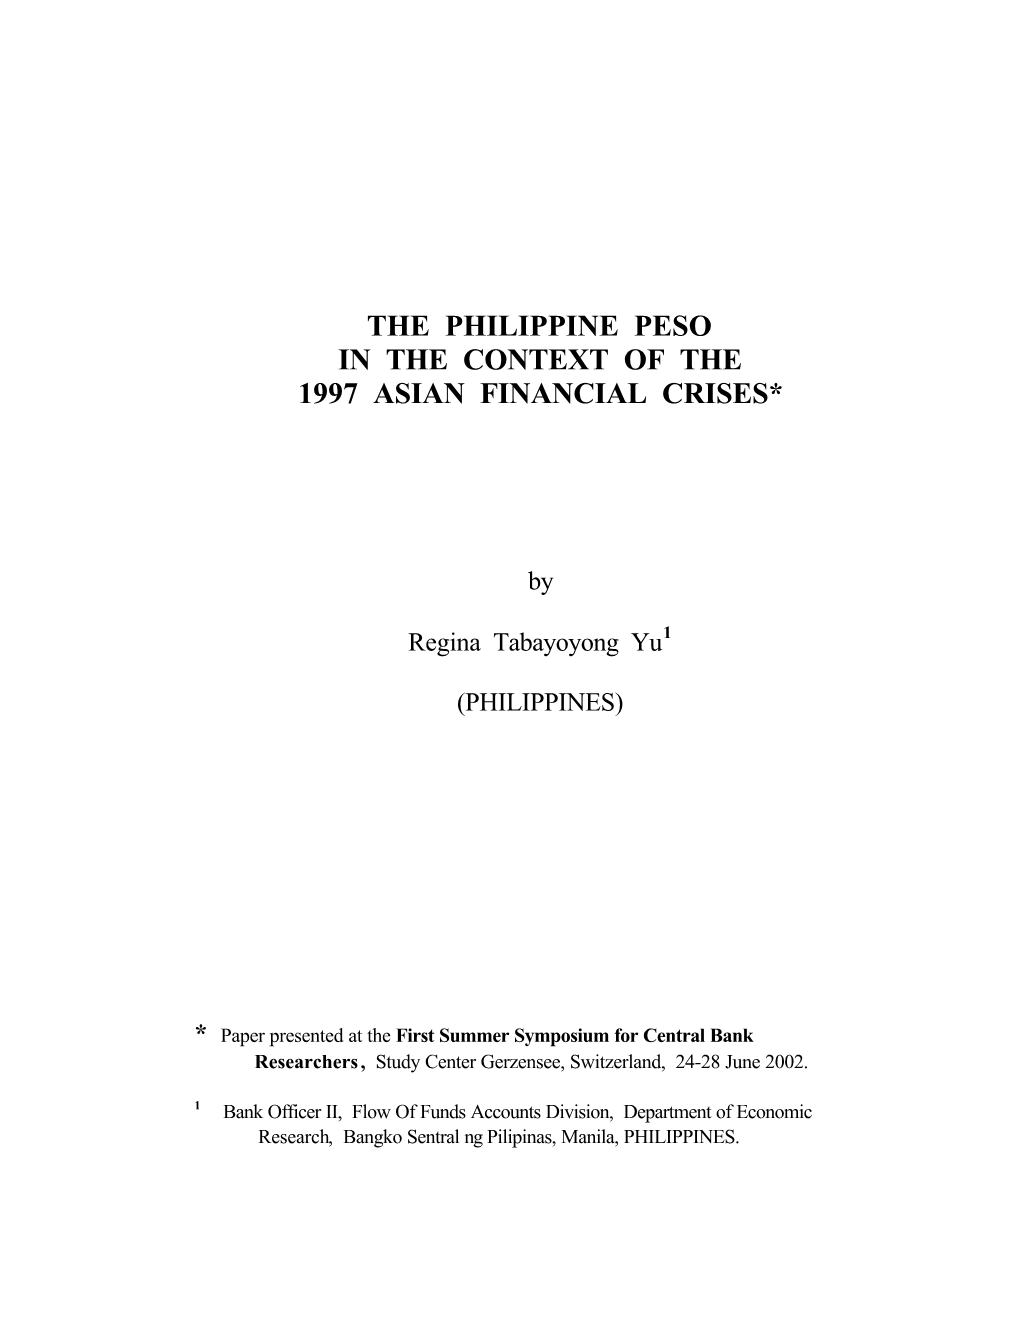 The Philippine Peso in the Context of the 1997 Asian Financial Crises*